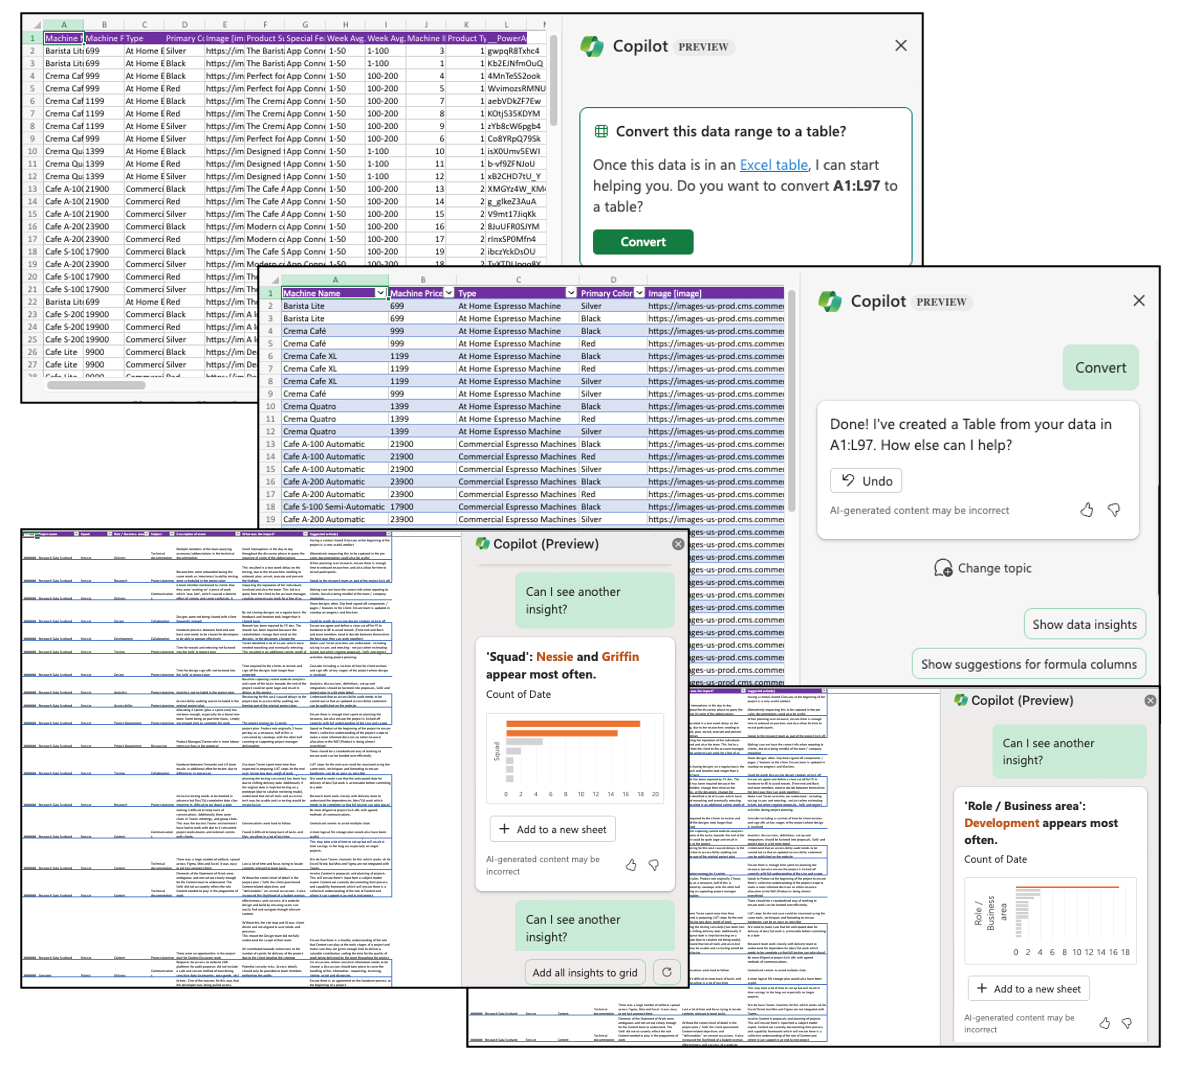 Screenshots show a series of excel sheets, with prompts from the user asking Copilot for insights on the data